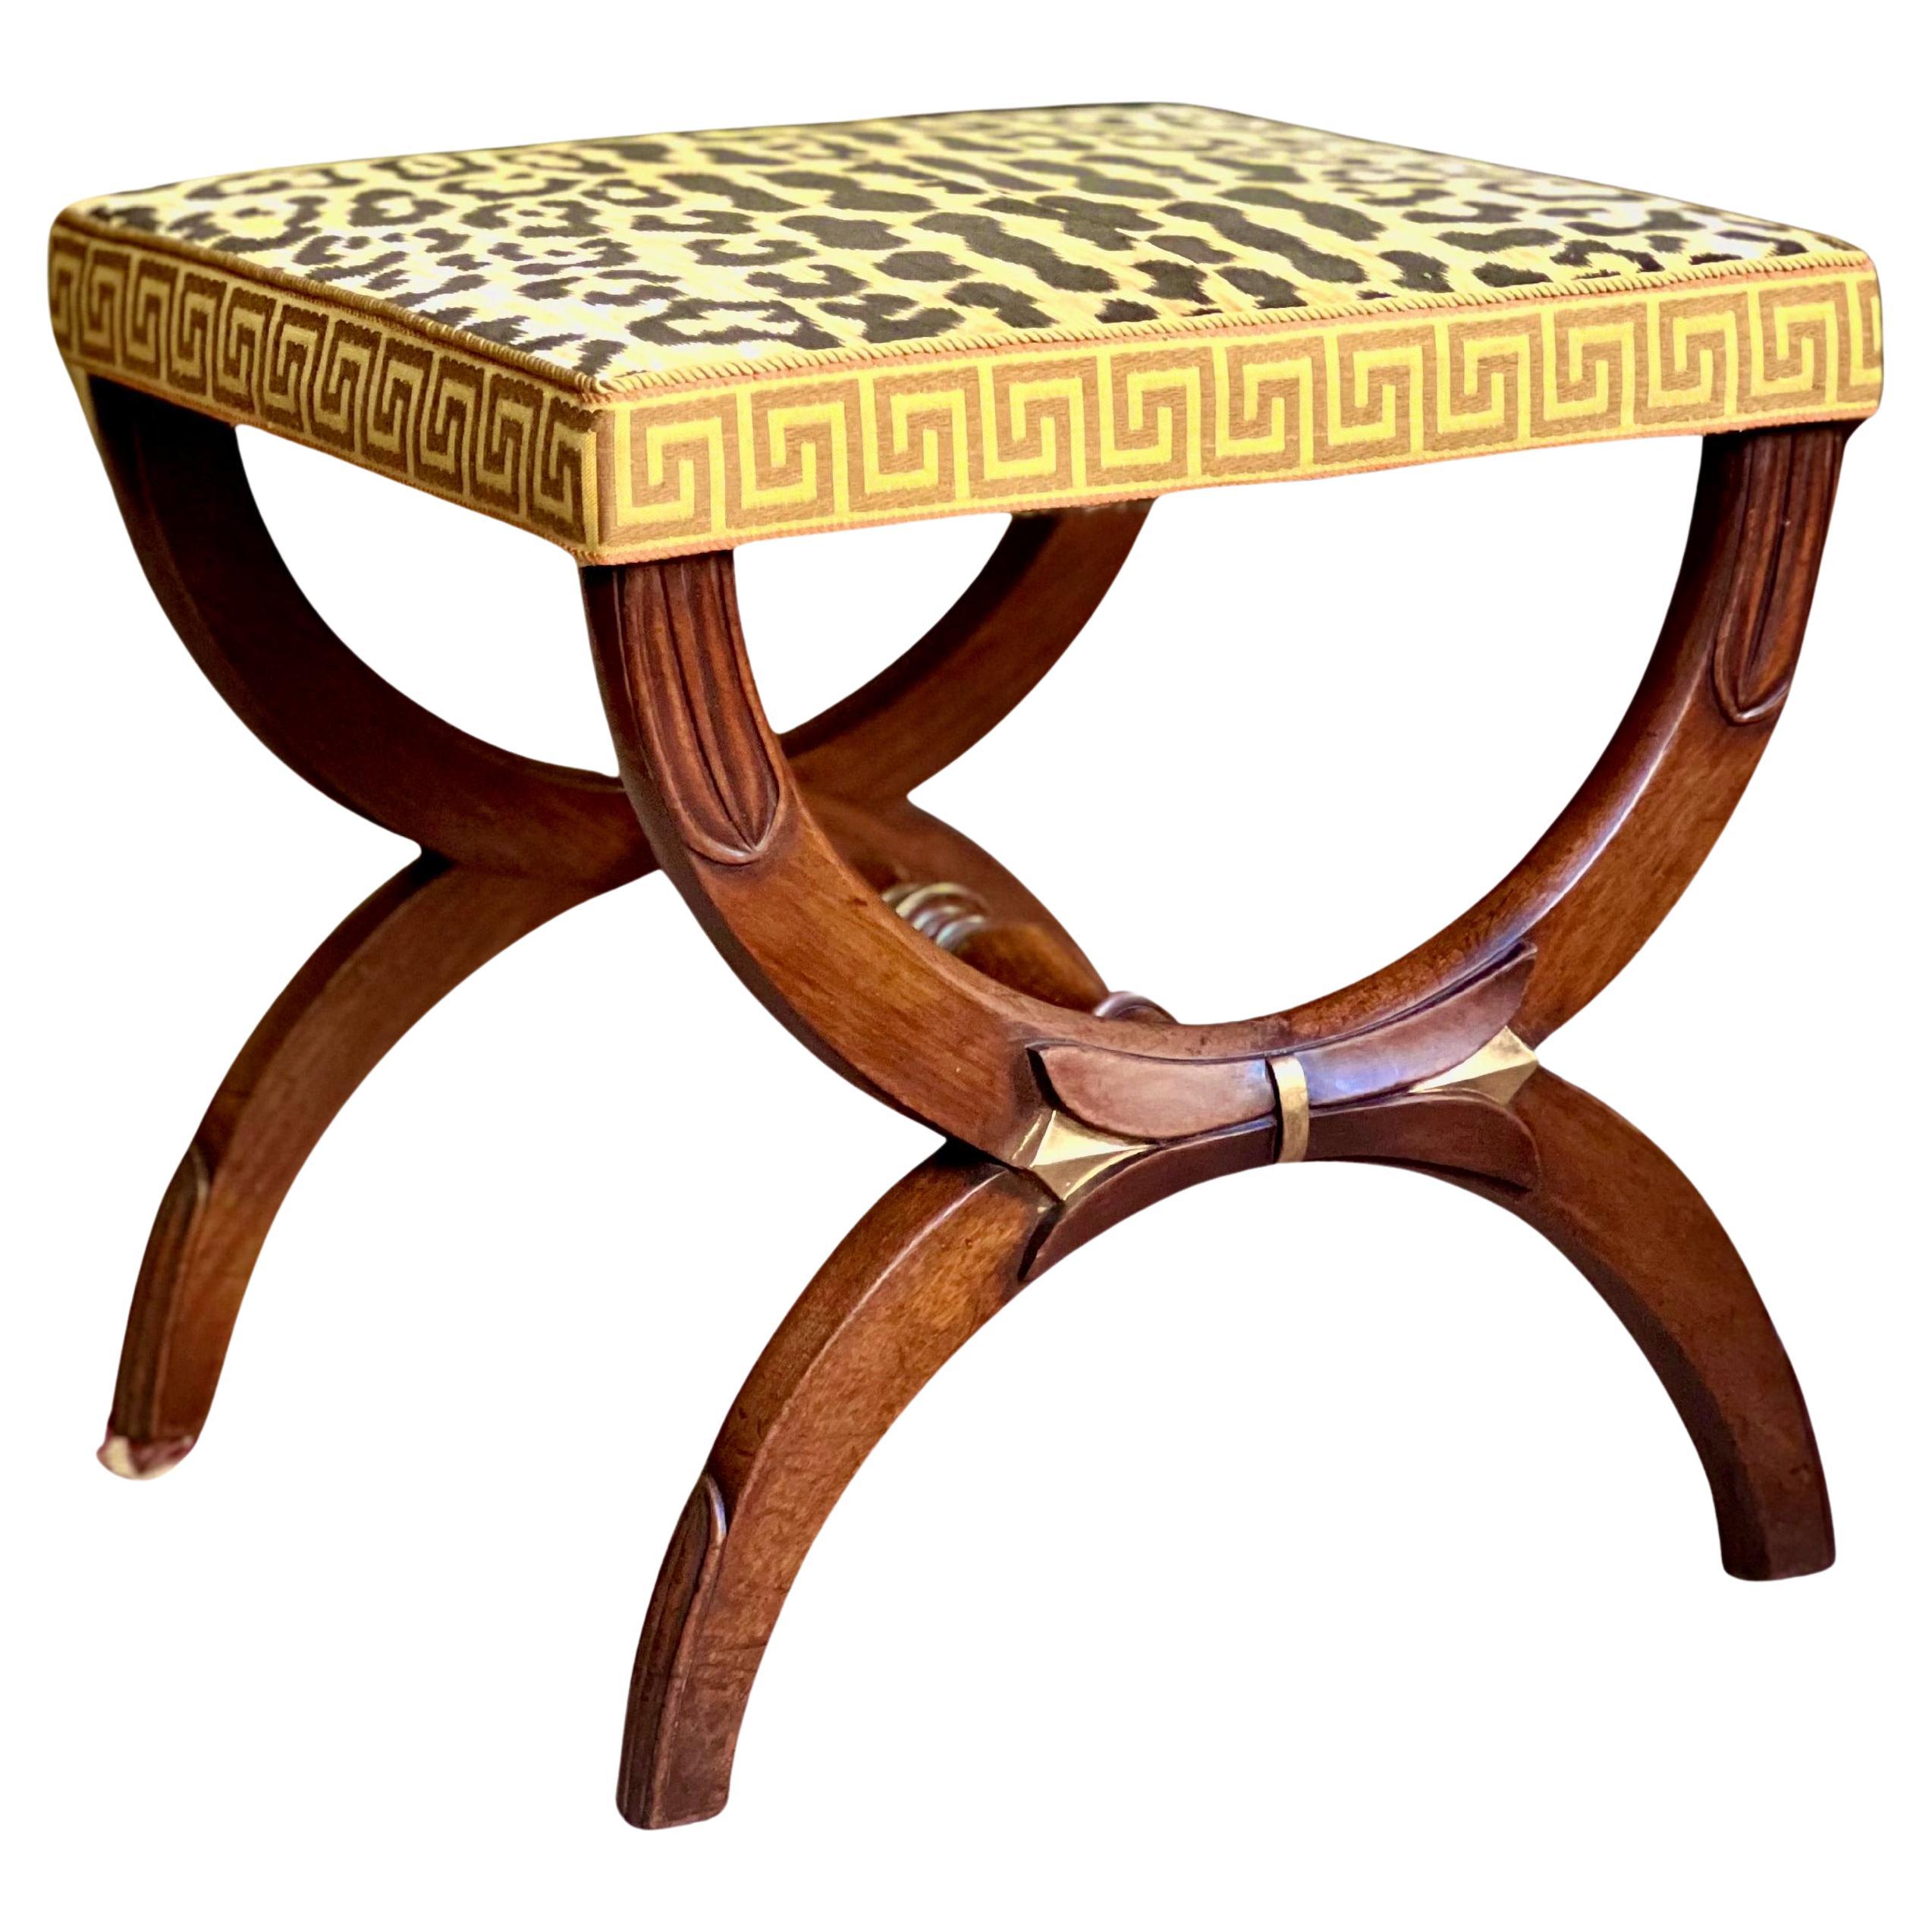 Antique Curule Stool in Leopard Print and Greek Key Border For Sale